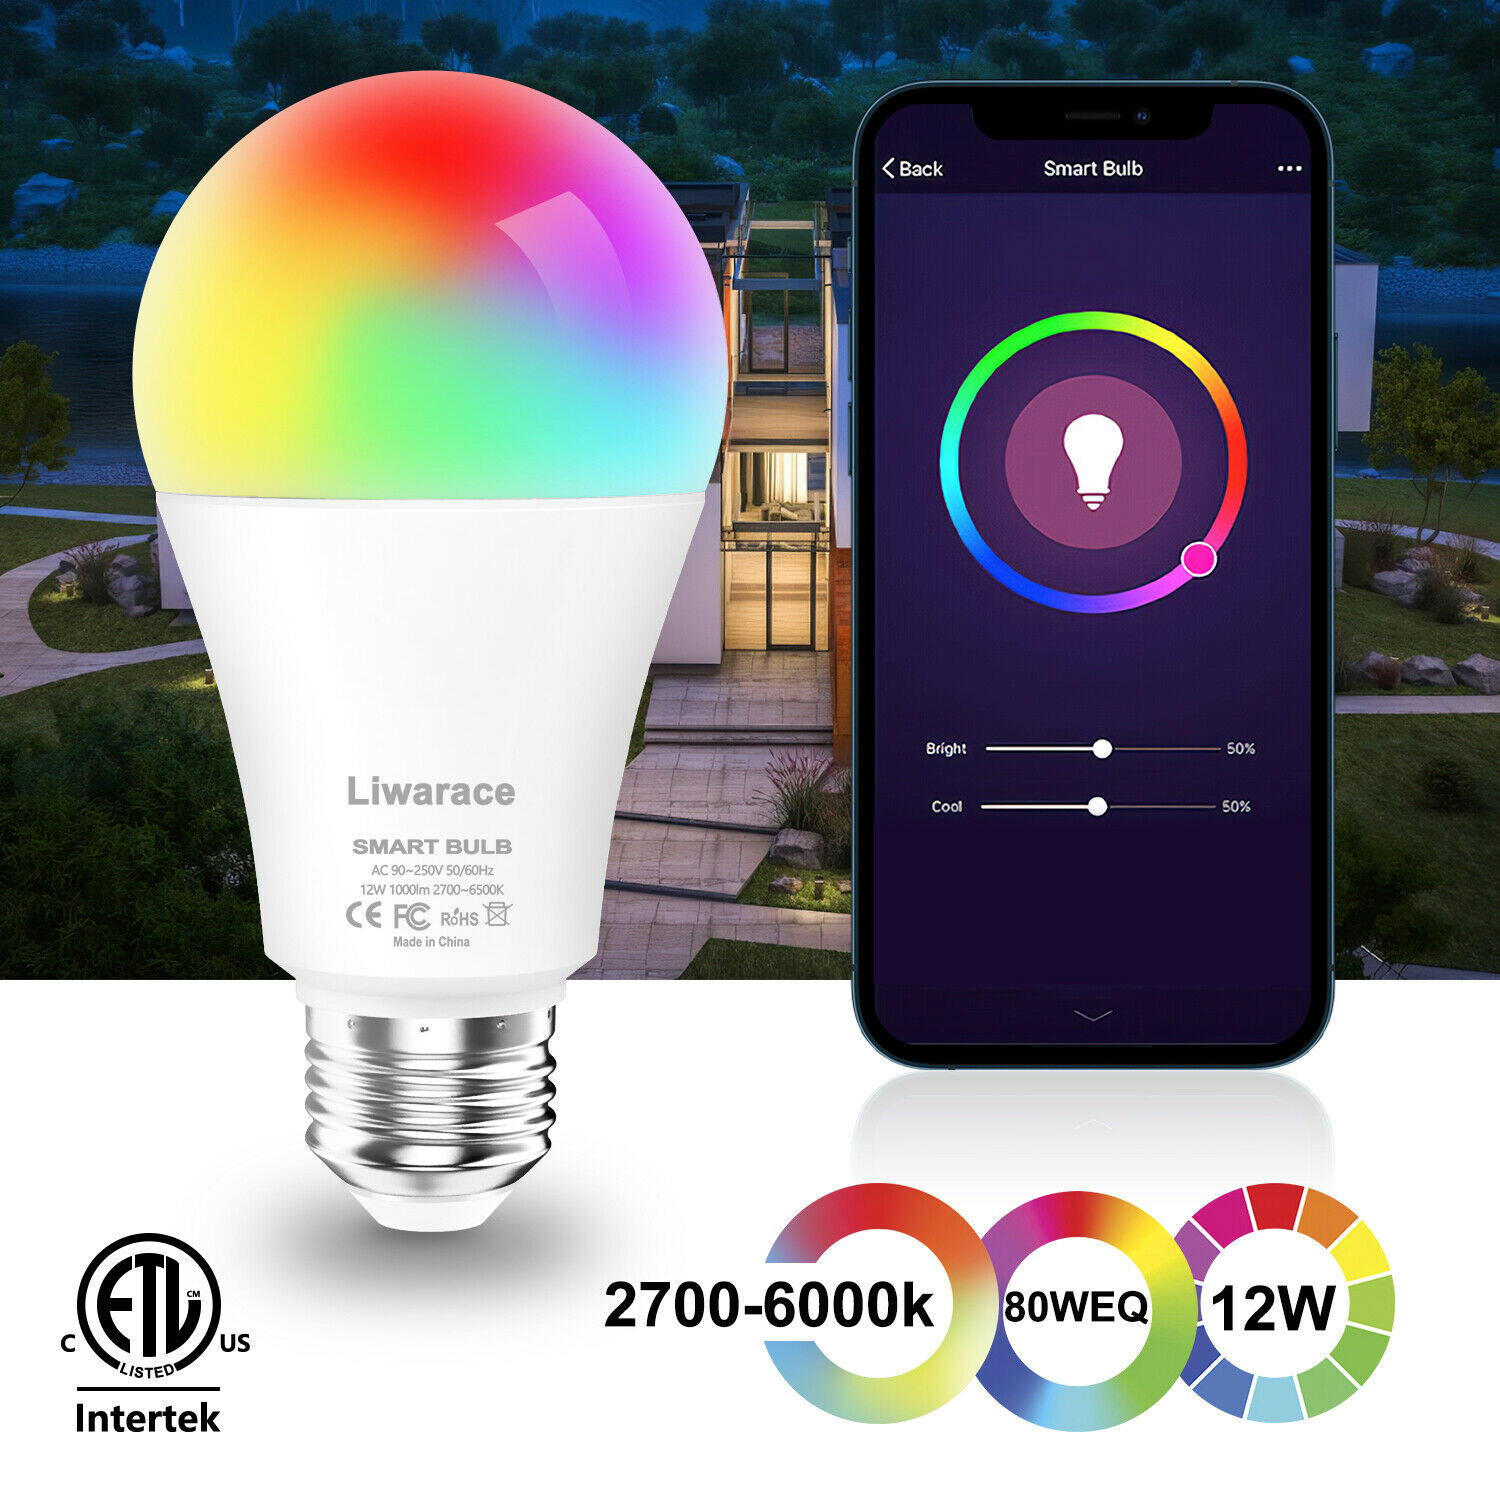 Smart LED Bulb & Socket Home Starter Kit I Easy to Install with Wifi Internet Connection I Free App Download for Smart Phone Control I Compatible with Alexa and Google Assistant for Voice Control 